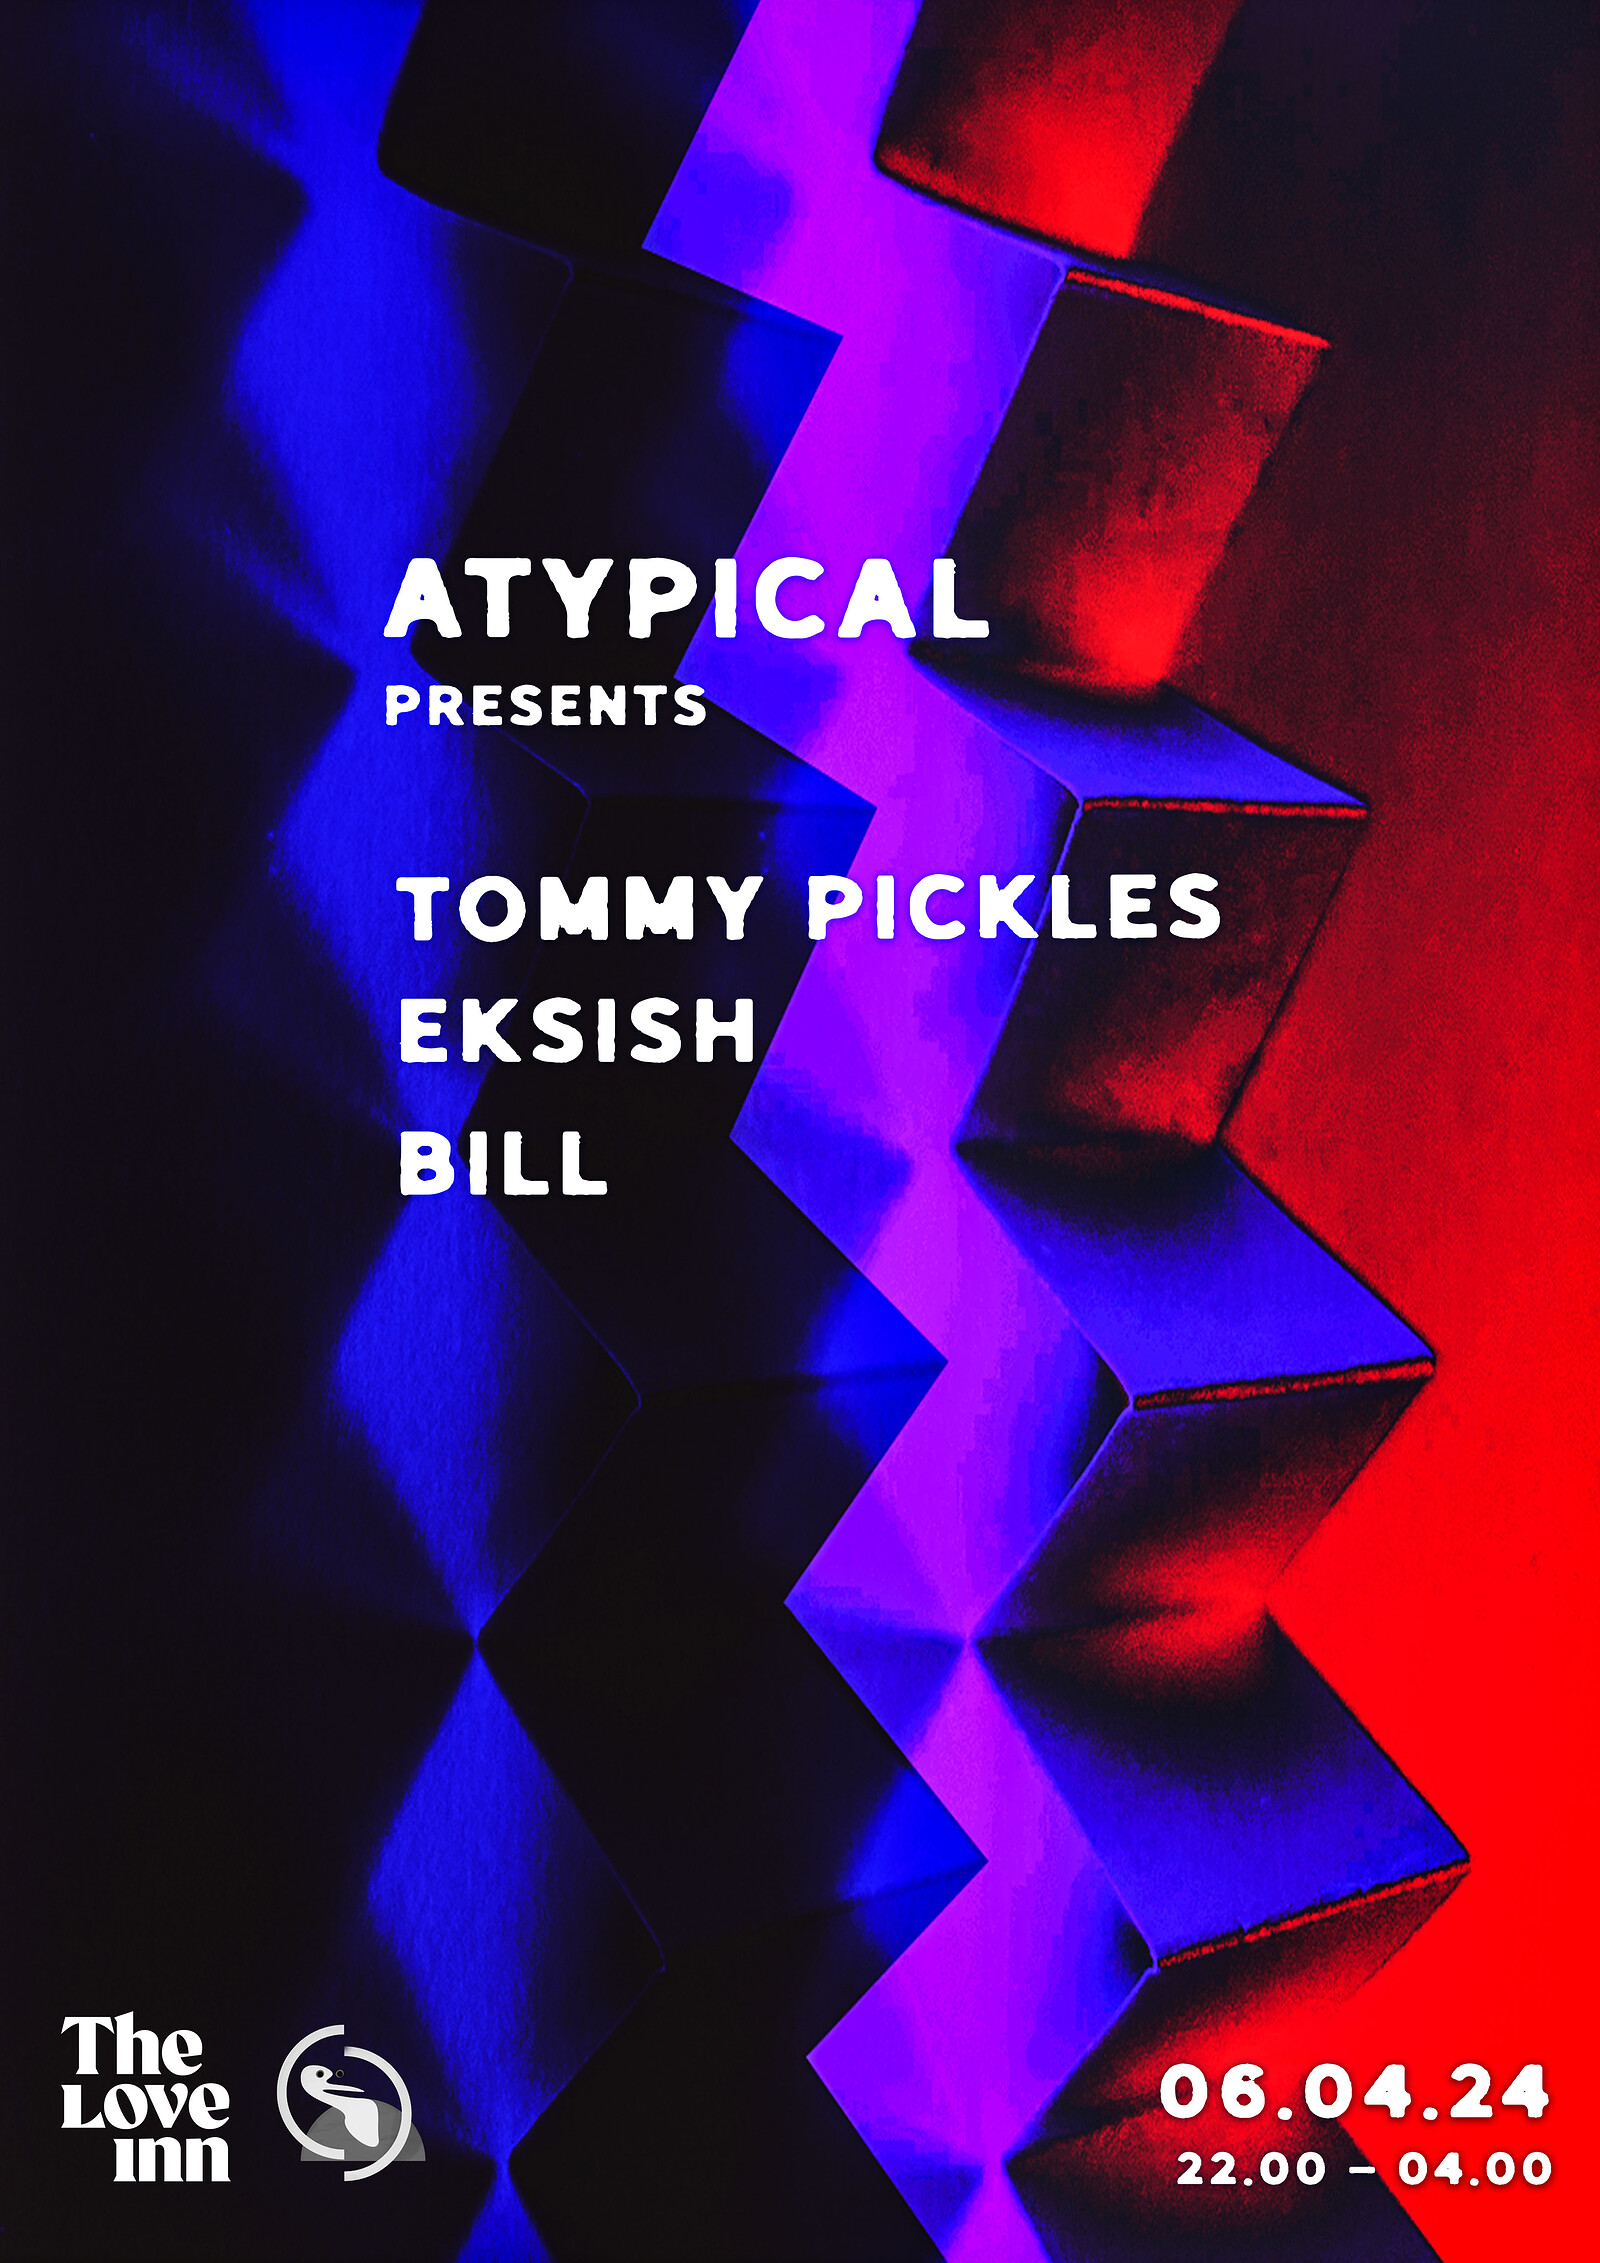 Atypical w/ Tommy Pickles, Eksish + Bill at The Love Inn